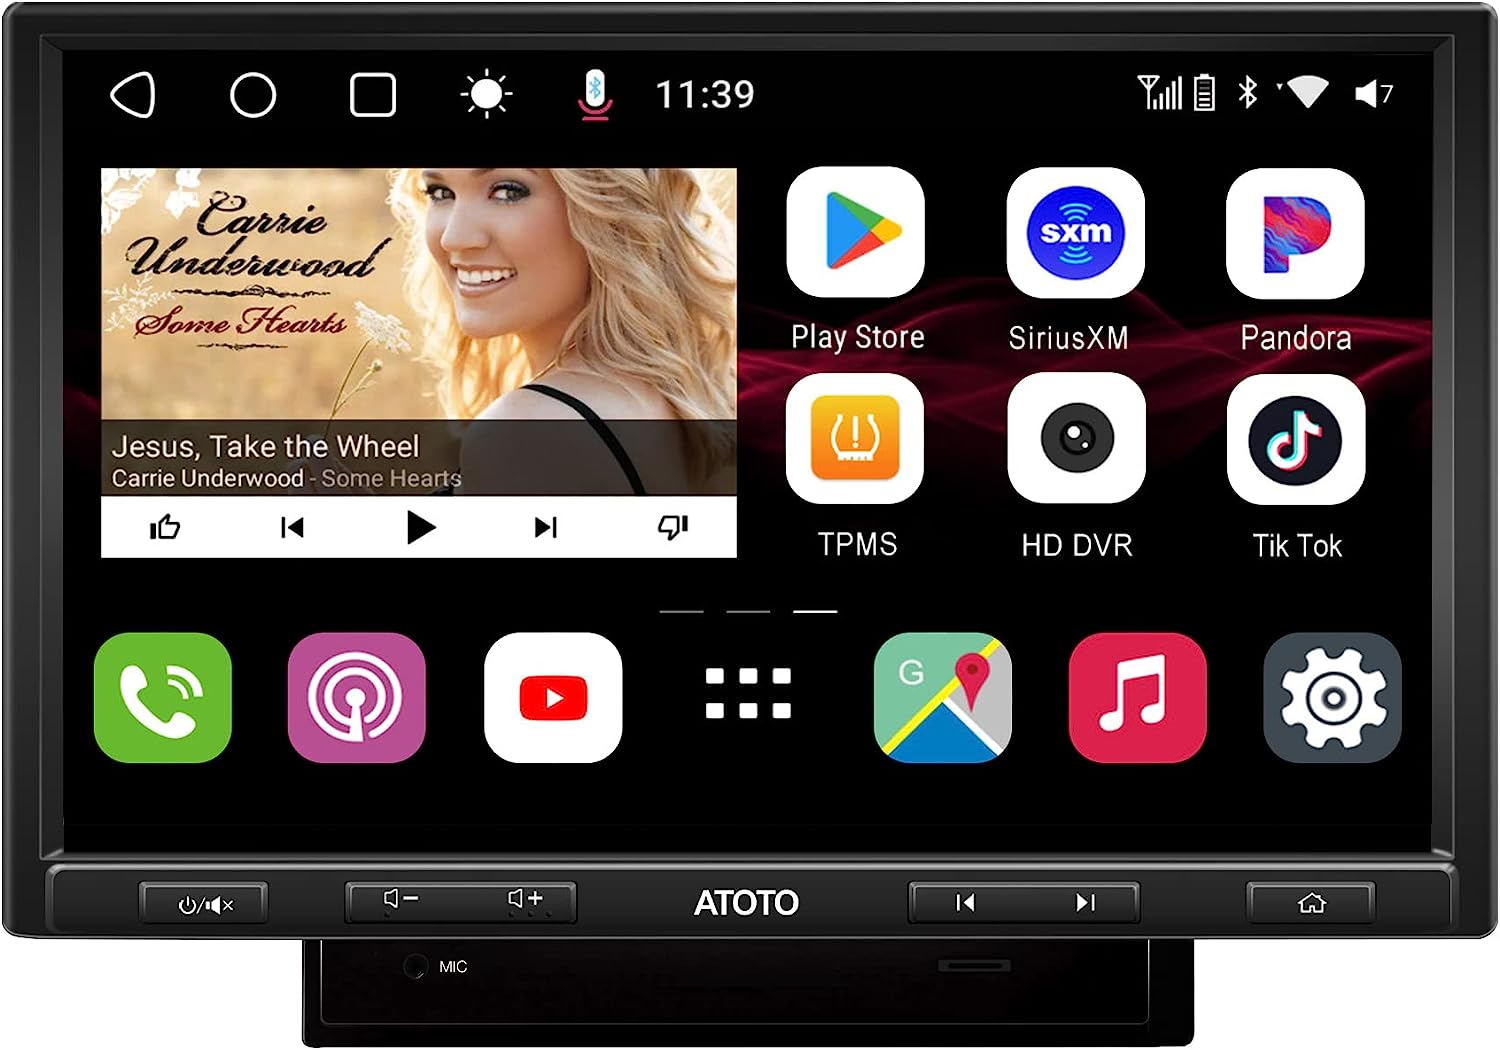 ATOTO S8 Pro 10.1″ Android Car Stereo